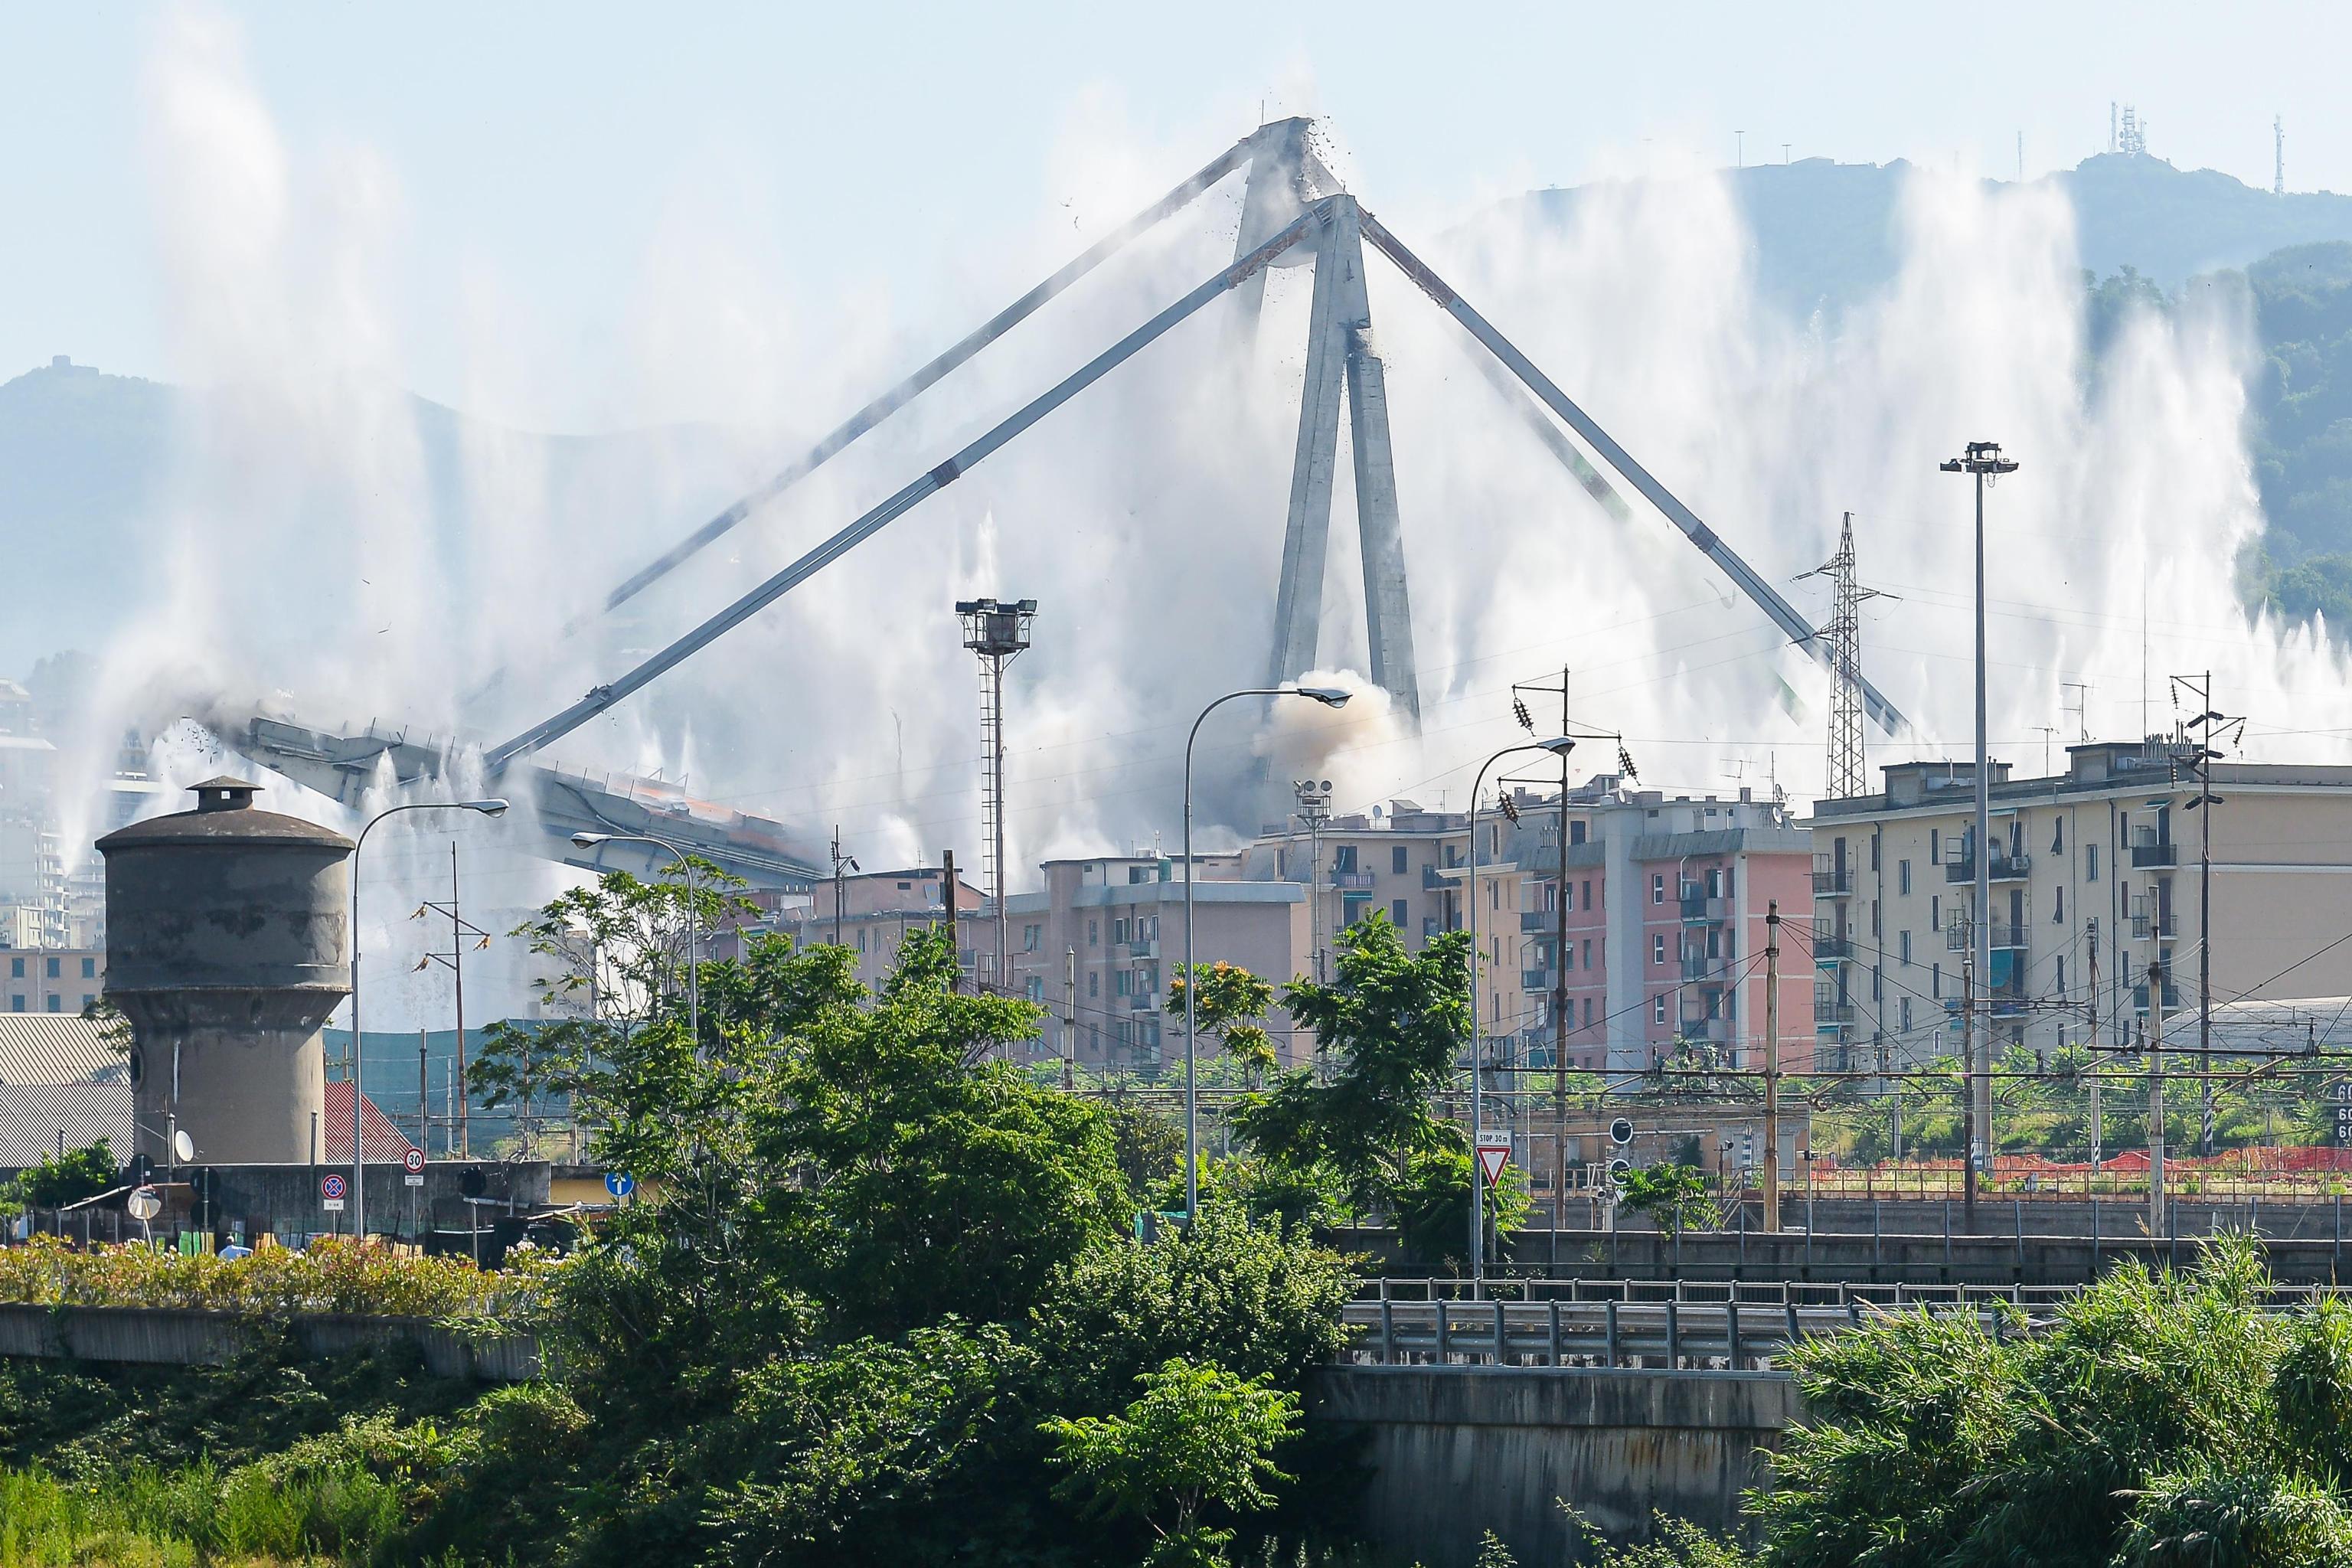 A general view of the demolition "pile" 10 and 11 Morandi bridge with micro-explosive charges, in Genoa, Italy, 28 june 2019. The new viaduct replacing the Morandi bridge is expected to be completed by  2020. The Morandi bridge partially collapsed on 14 august 2018 killing 43 people. ANSA/LUCA ZENNARO